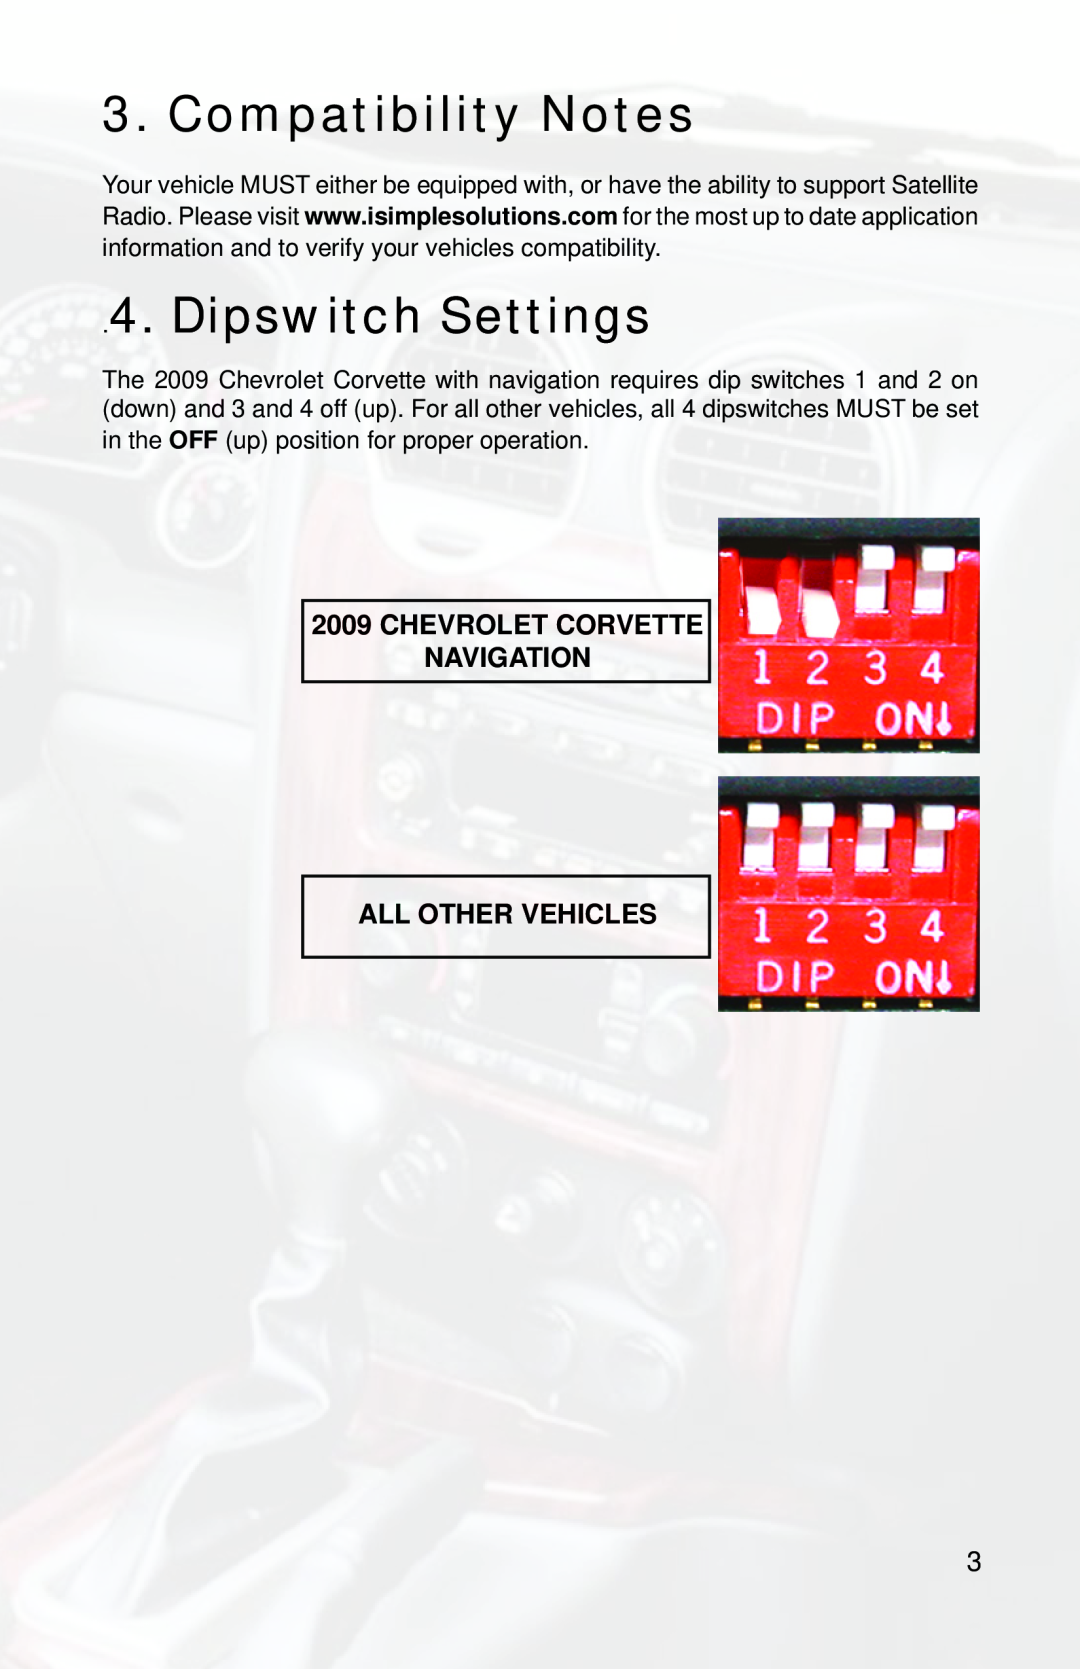 iSimple PGHGM5, ISGM11 Compatibility Notes, Dipswitch Settings, Chevrolet Corvette NAVIGATION, All Other Vehicles 